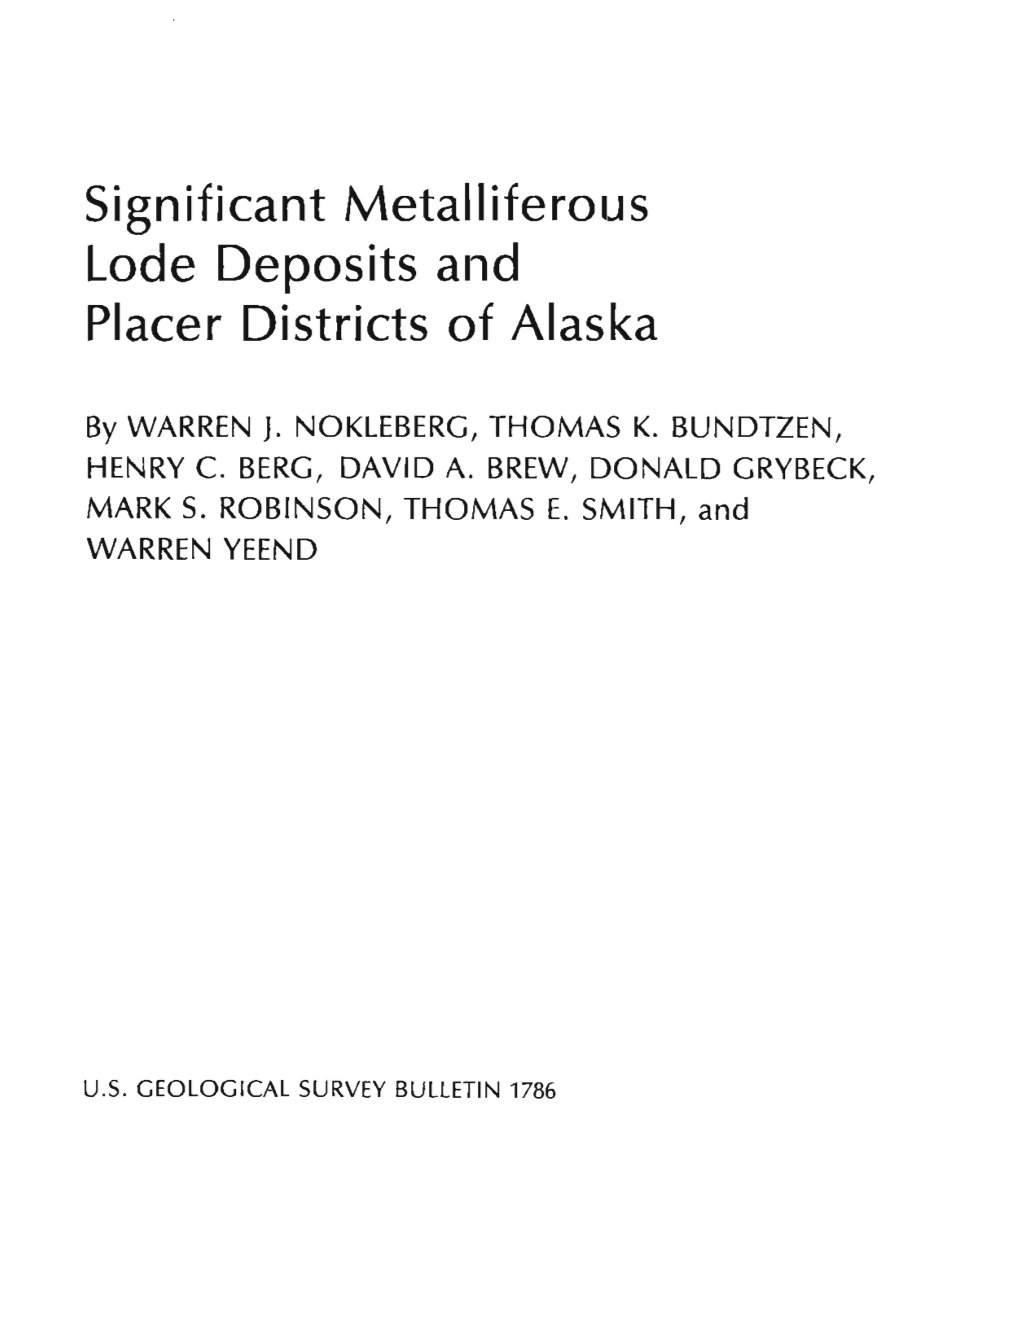 Significant Metalliferous Lode Deposits and Placer Districts of Alaska